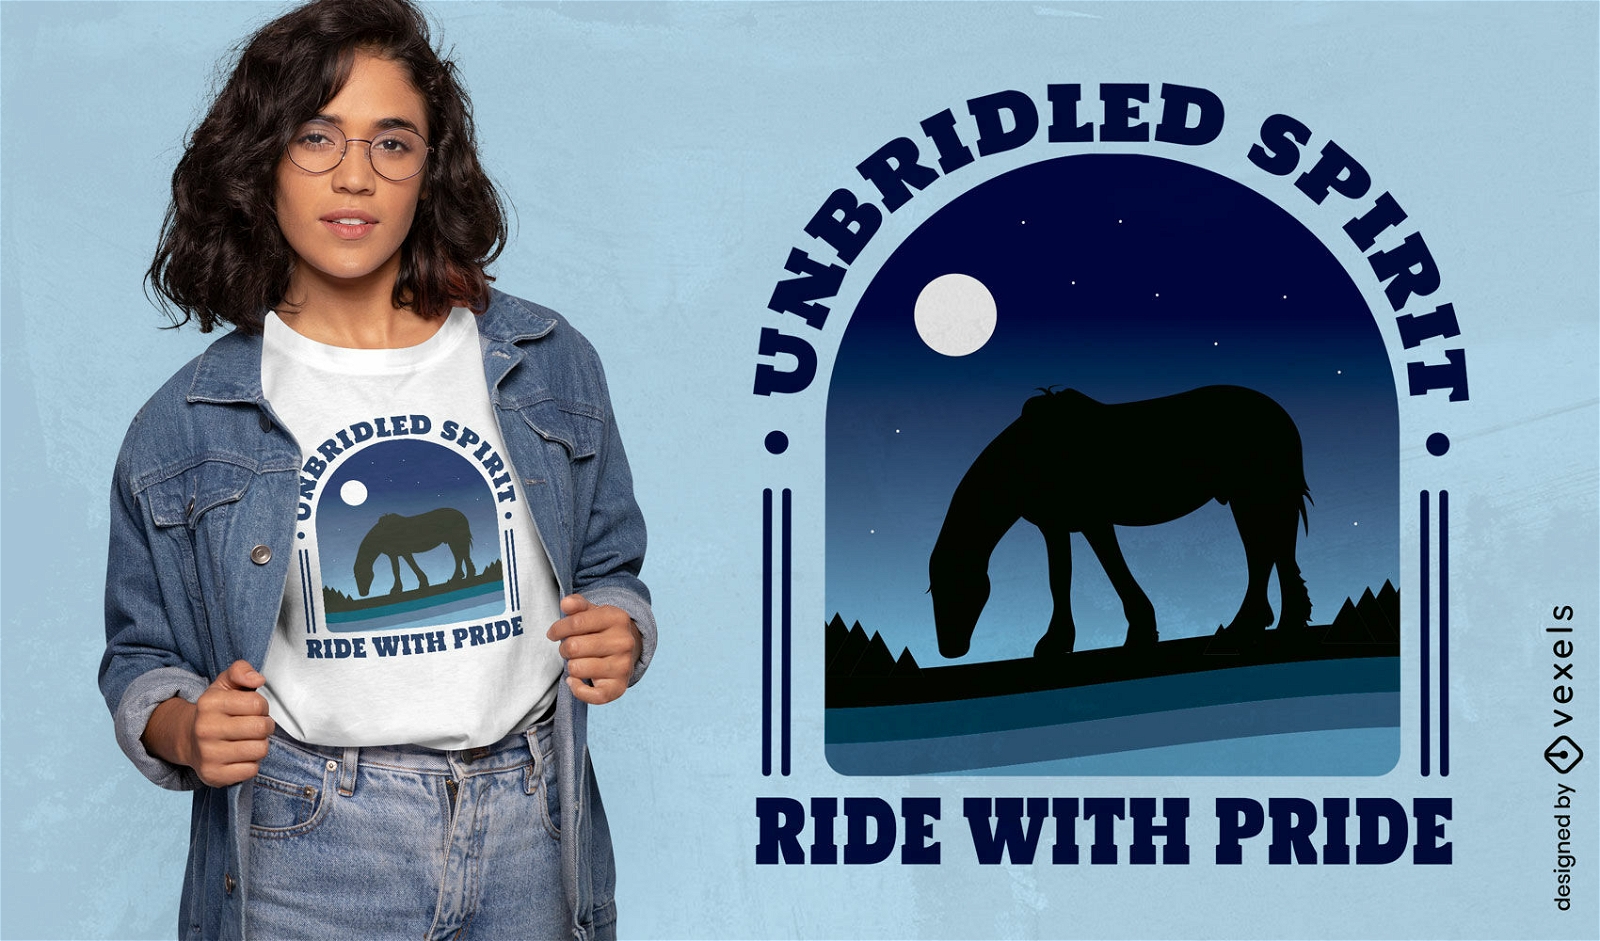 Ride with pride t-shirt design